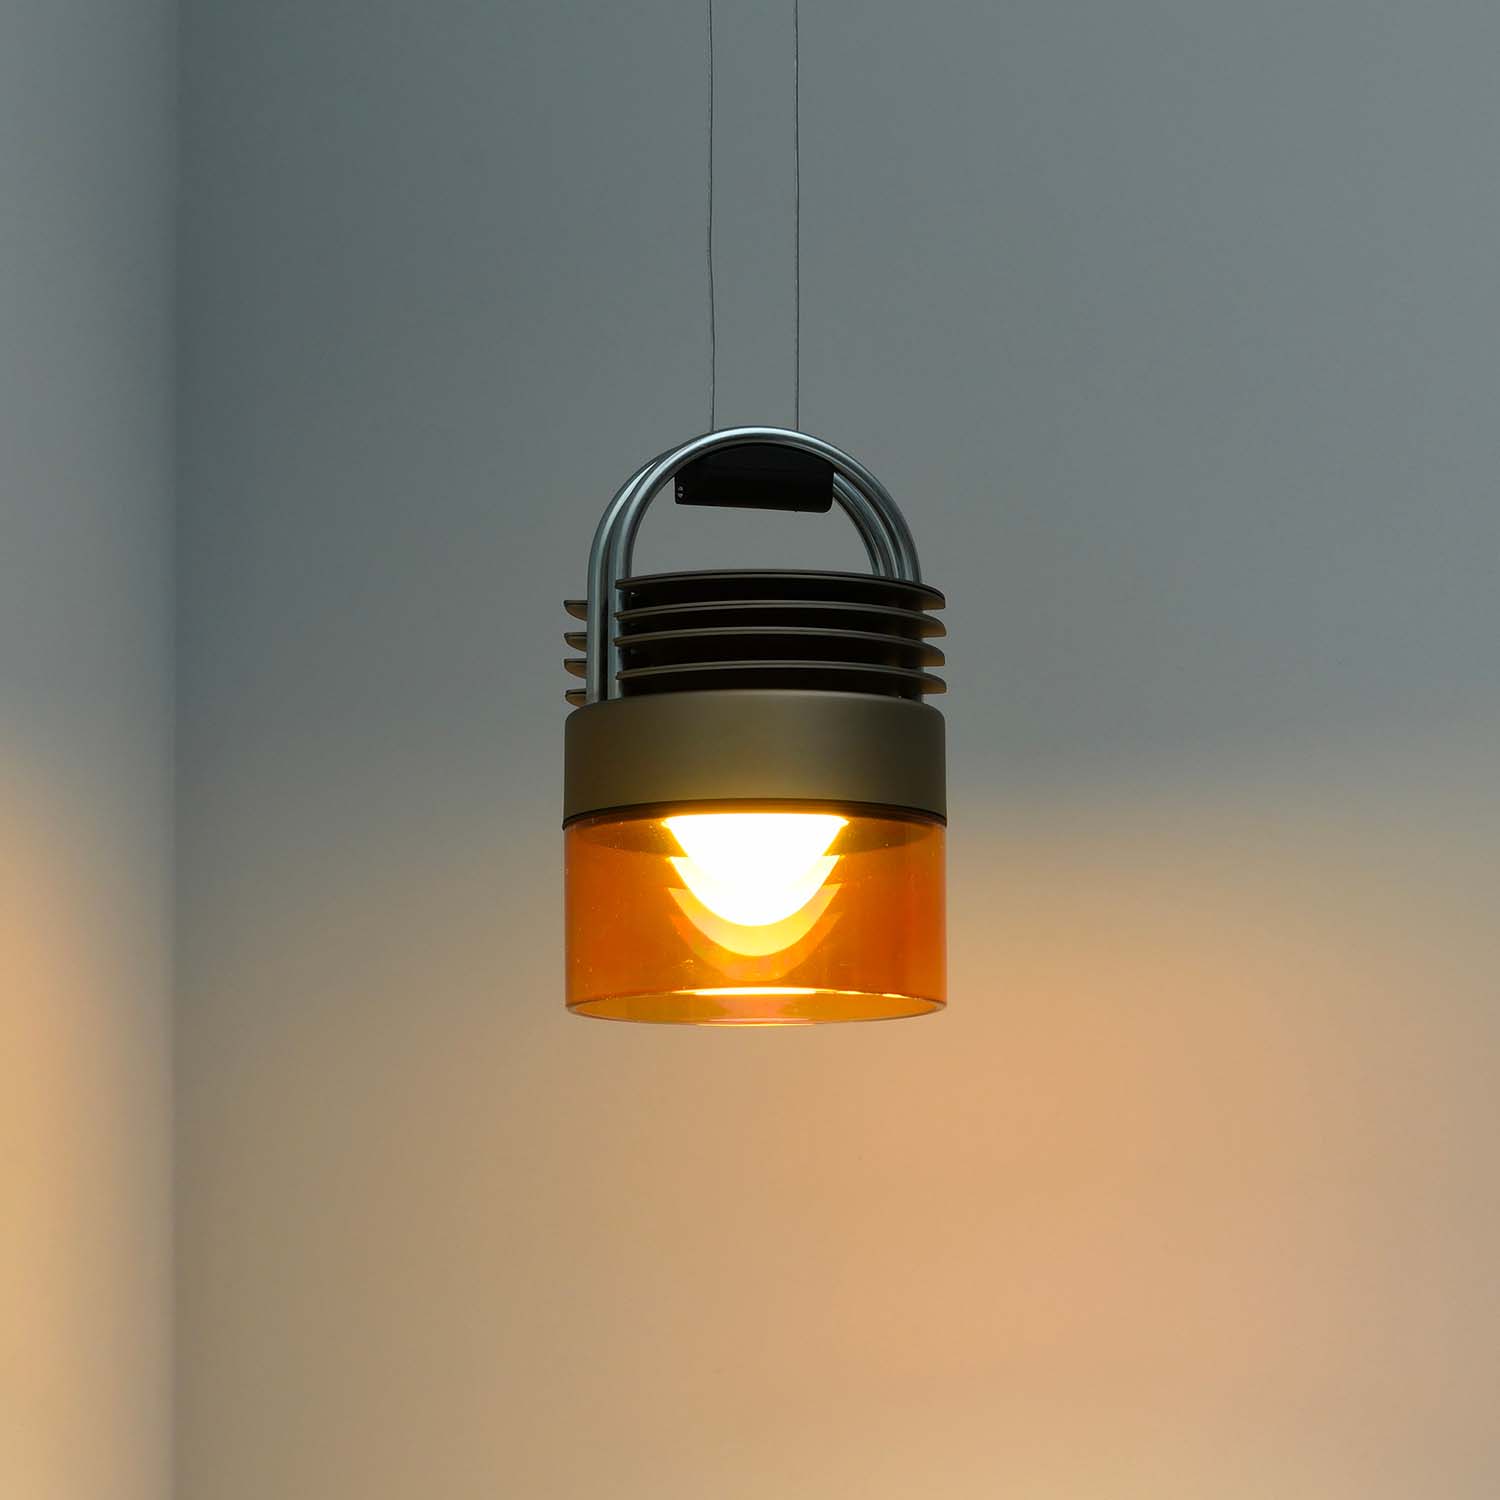 AIRMOD Glass - Contemporary glass and steel pendant lamp